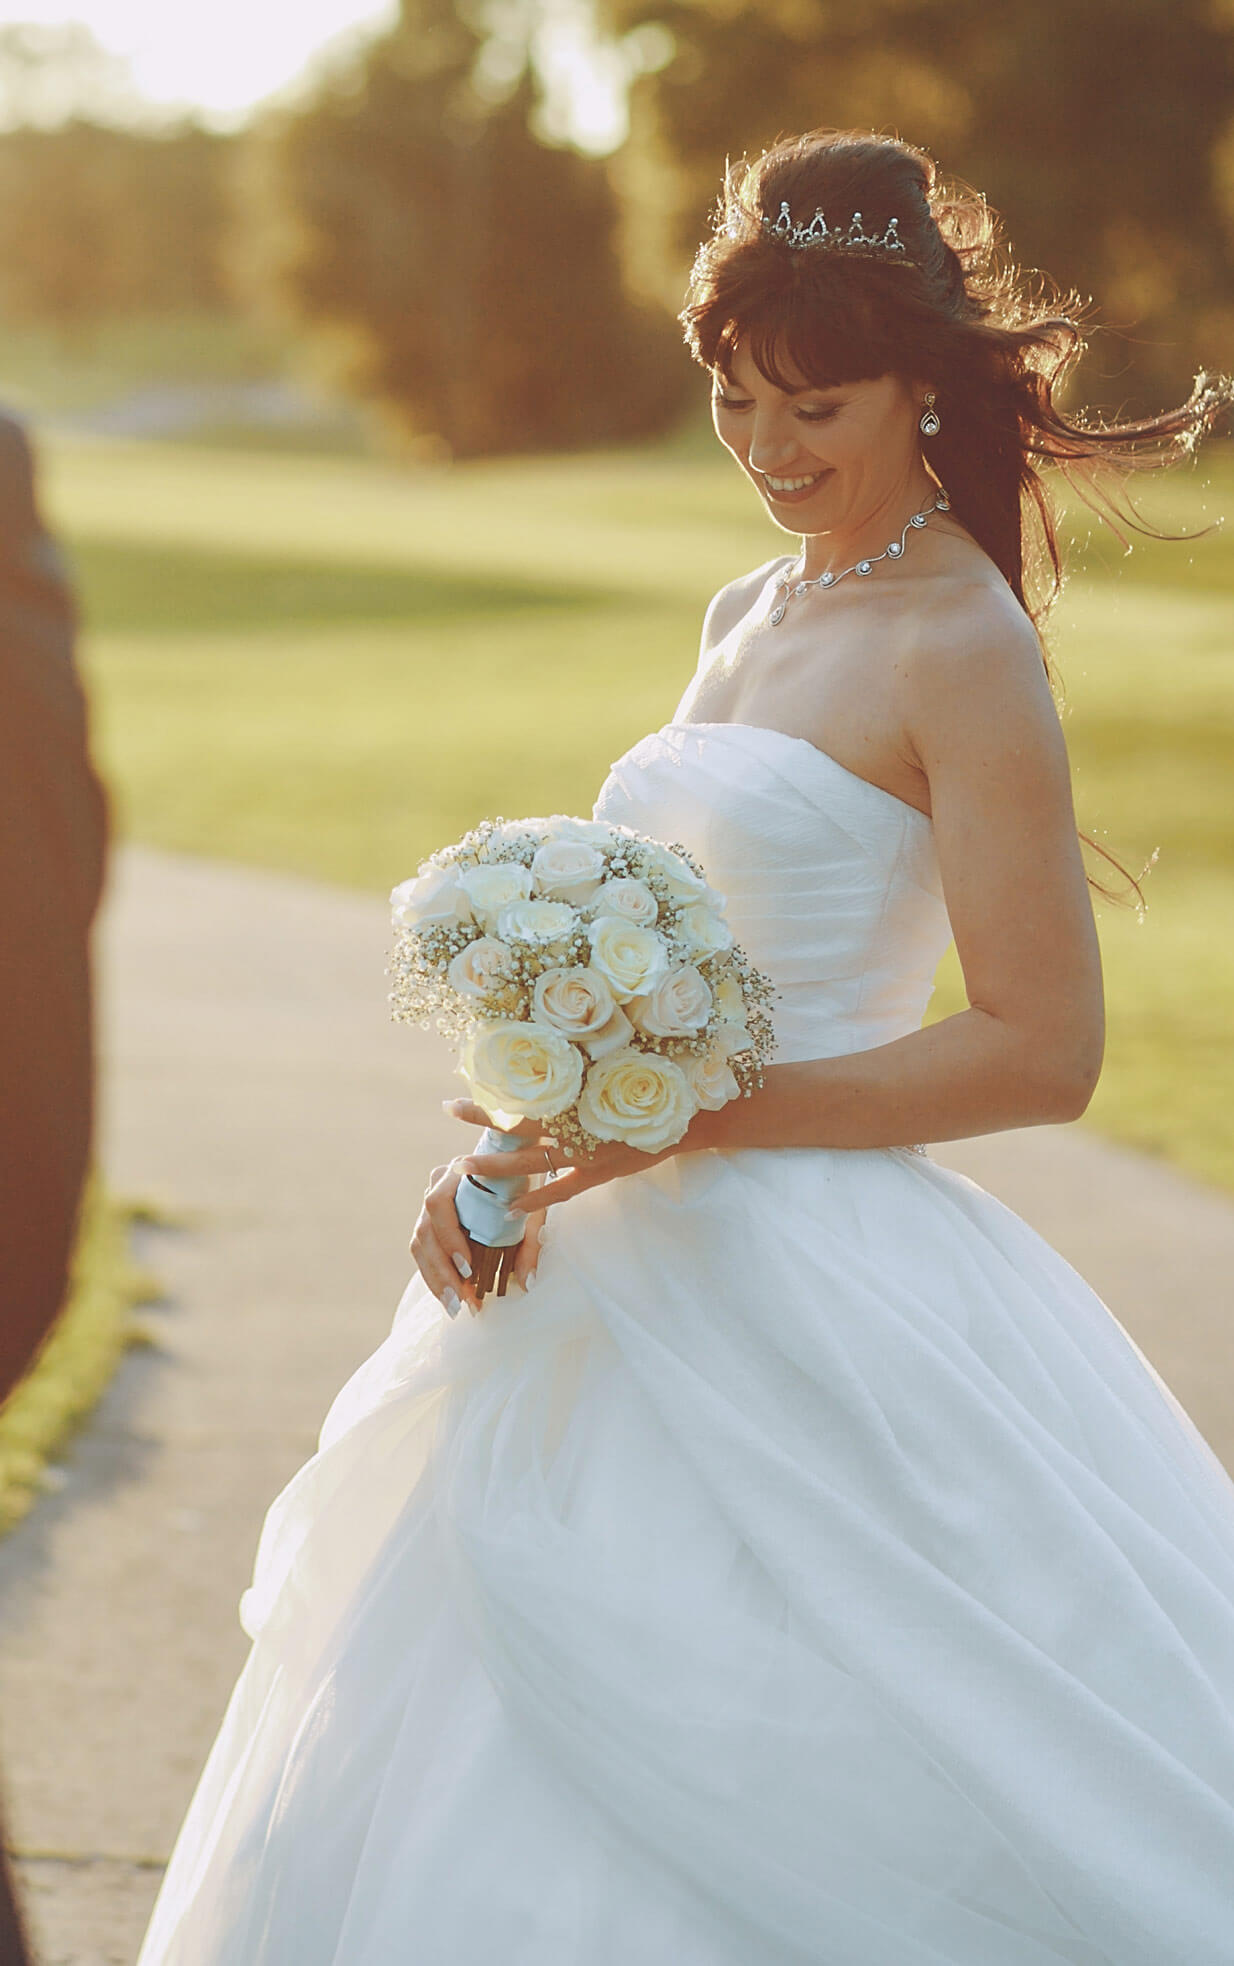 Beautiful bride on her wedding day at Tanglewood Golf Club